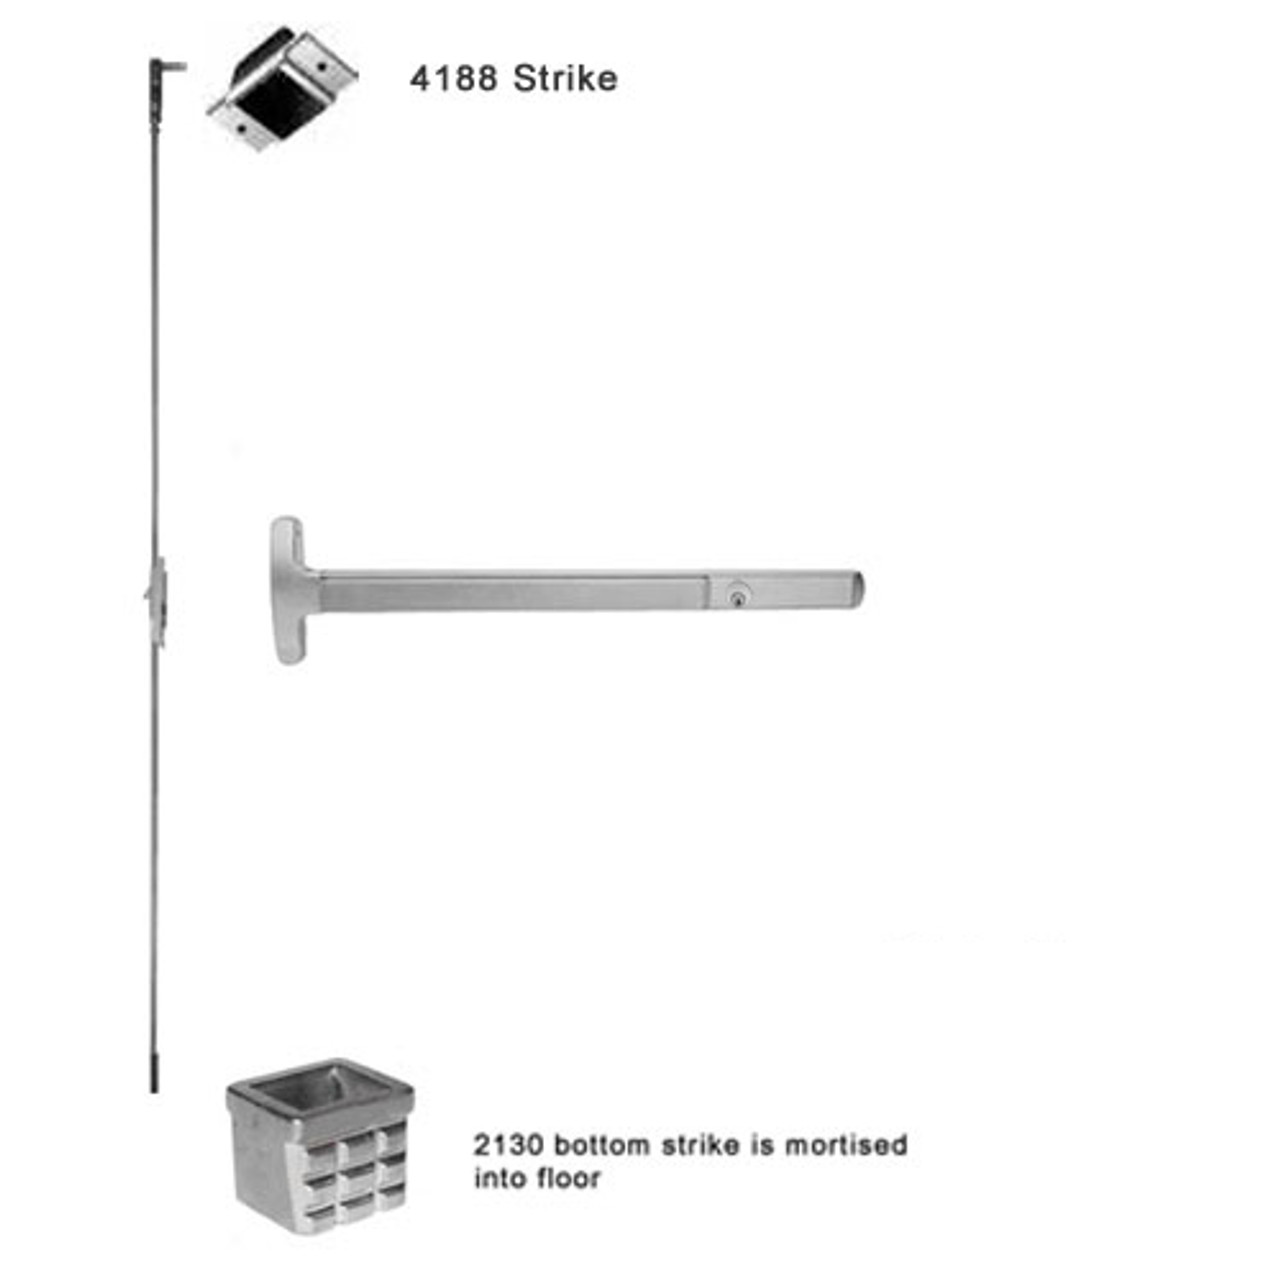 CD24-C-L-DANE-US26-4-LHR Falcon 24 Series Concealed Vertical Rod Device with 712L Dane Lever Trim in Polished Chrome